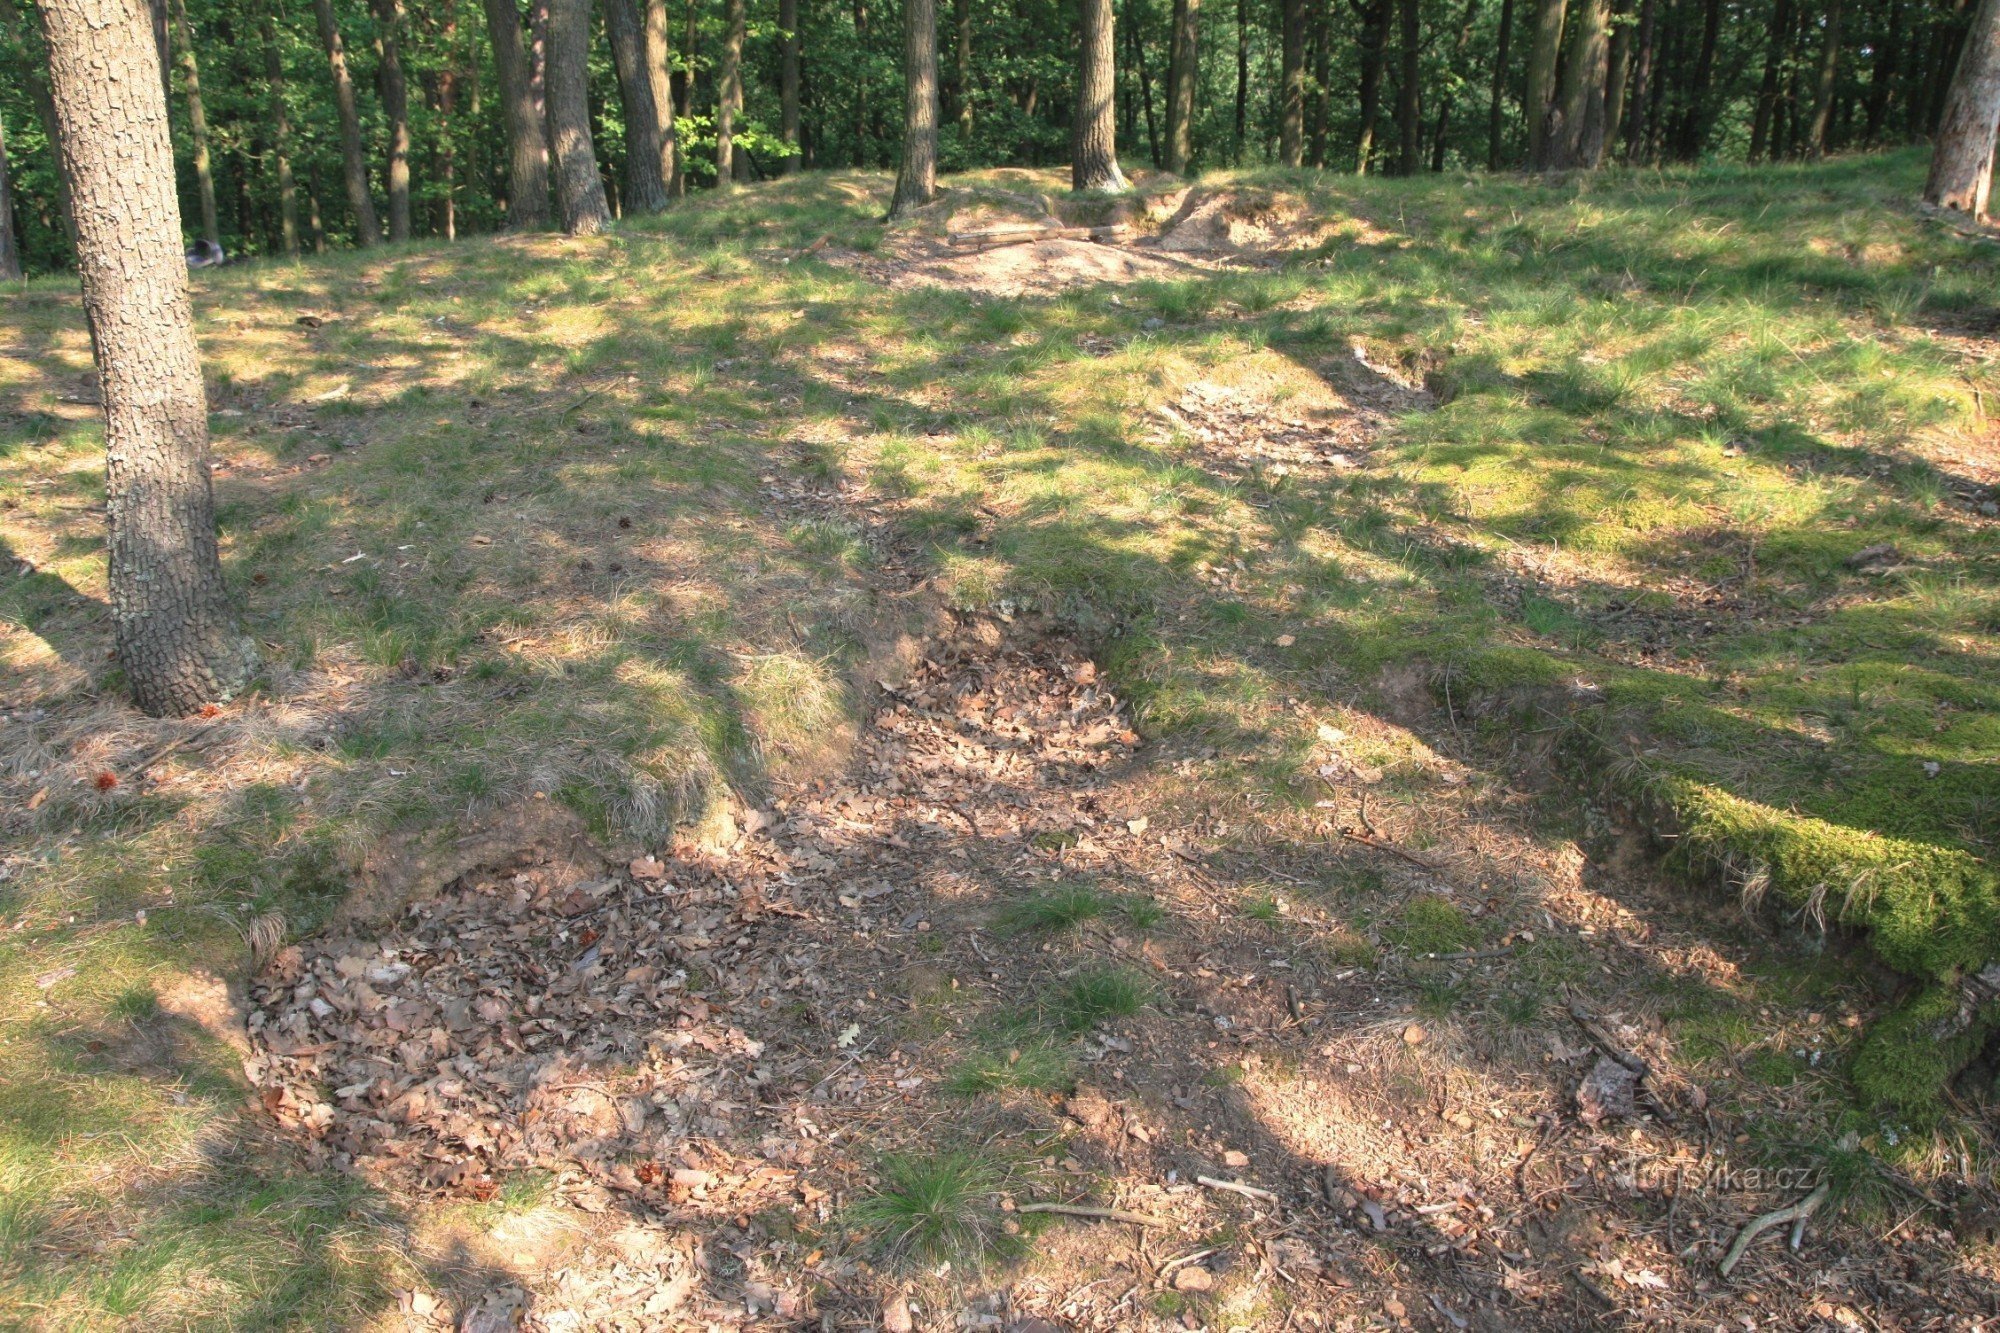 Remains from probes in Hradisk